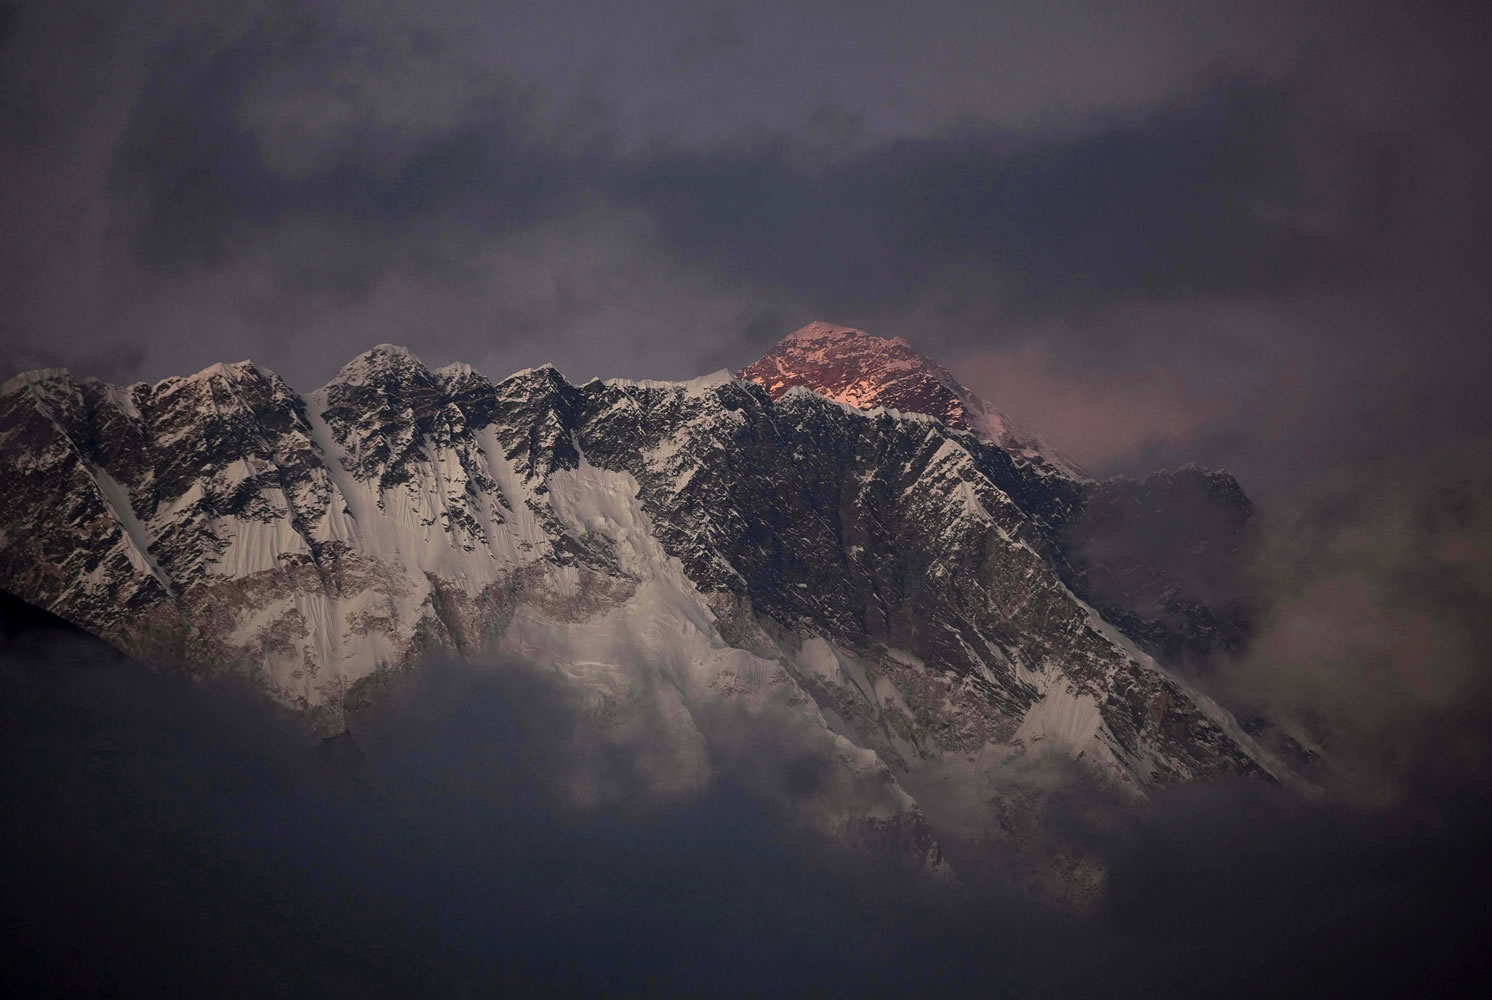 The last light of the day illuminates Mount Everest as seen from Tengboche, Nepal, in 2011.